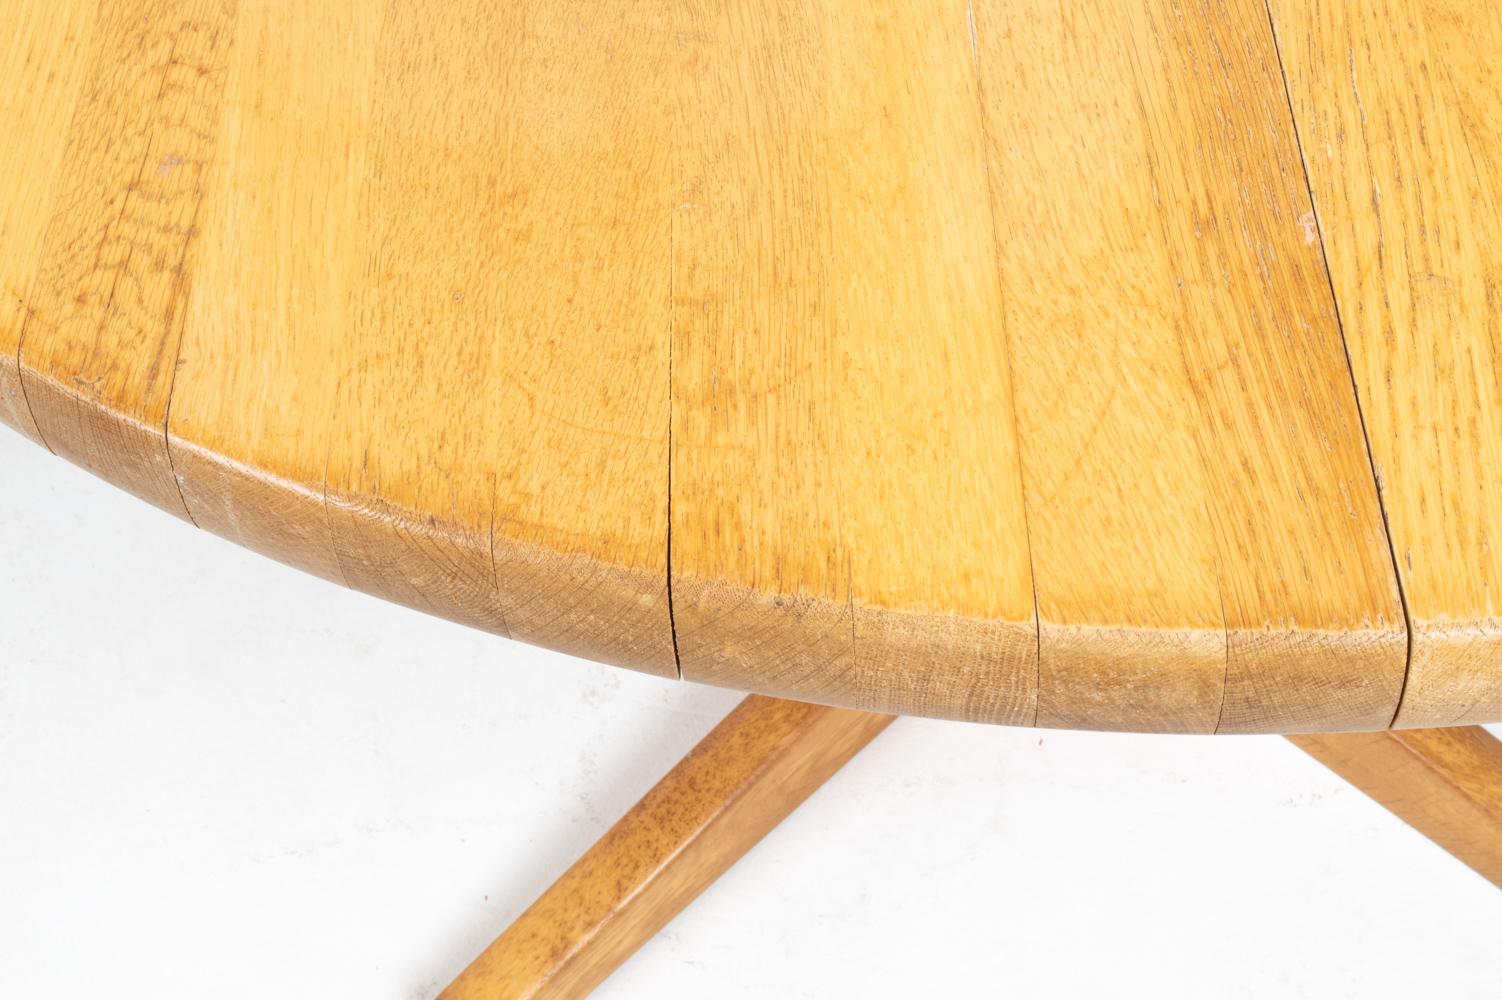 Oak Mid-Century Modern Extendable Dining Room Table by Niels Otto Møller, 1970s For Sale 7